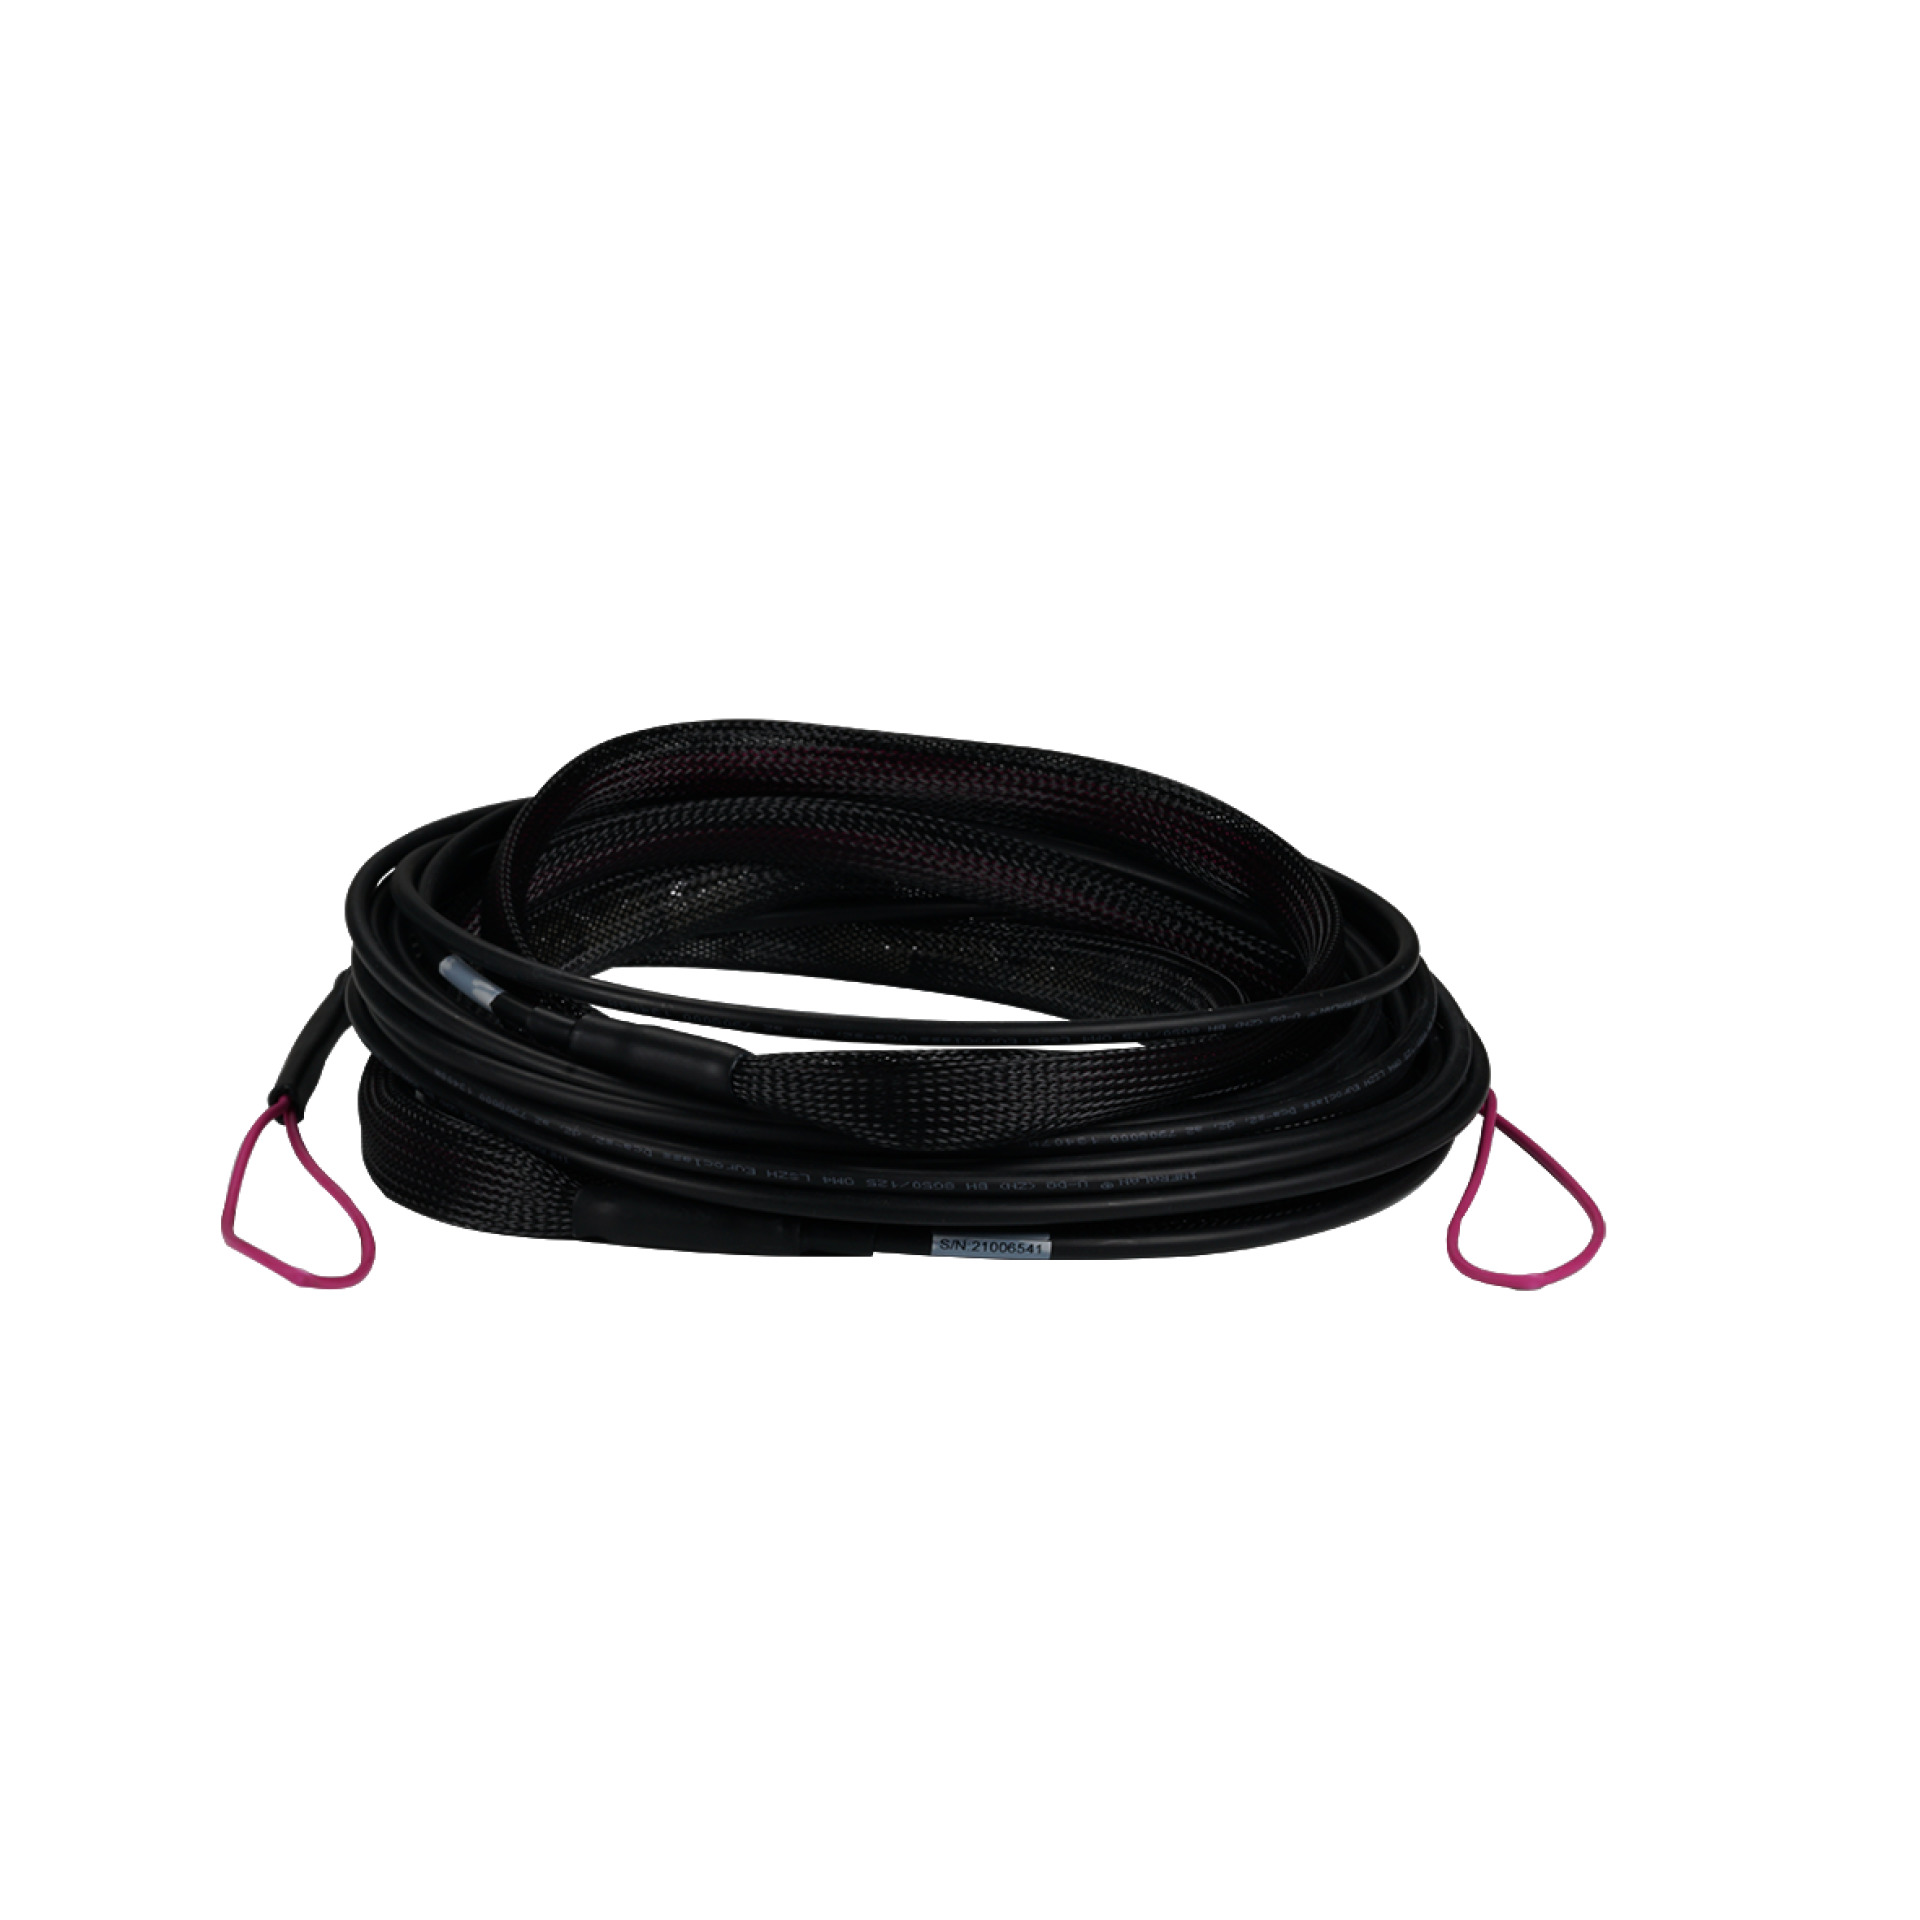 Trunk cable U-DQ(ZN)BH 4G 50/125, SC/SC OM4 10m